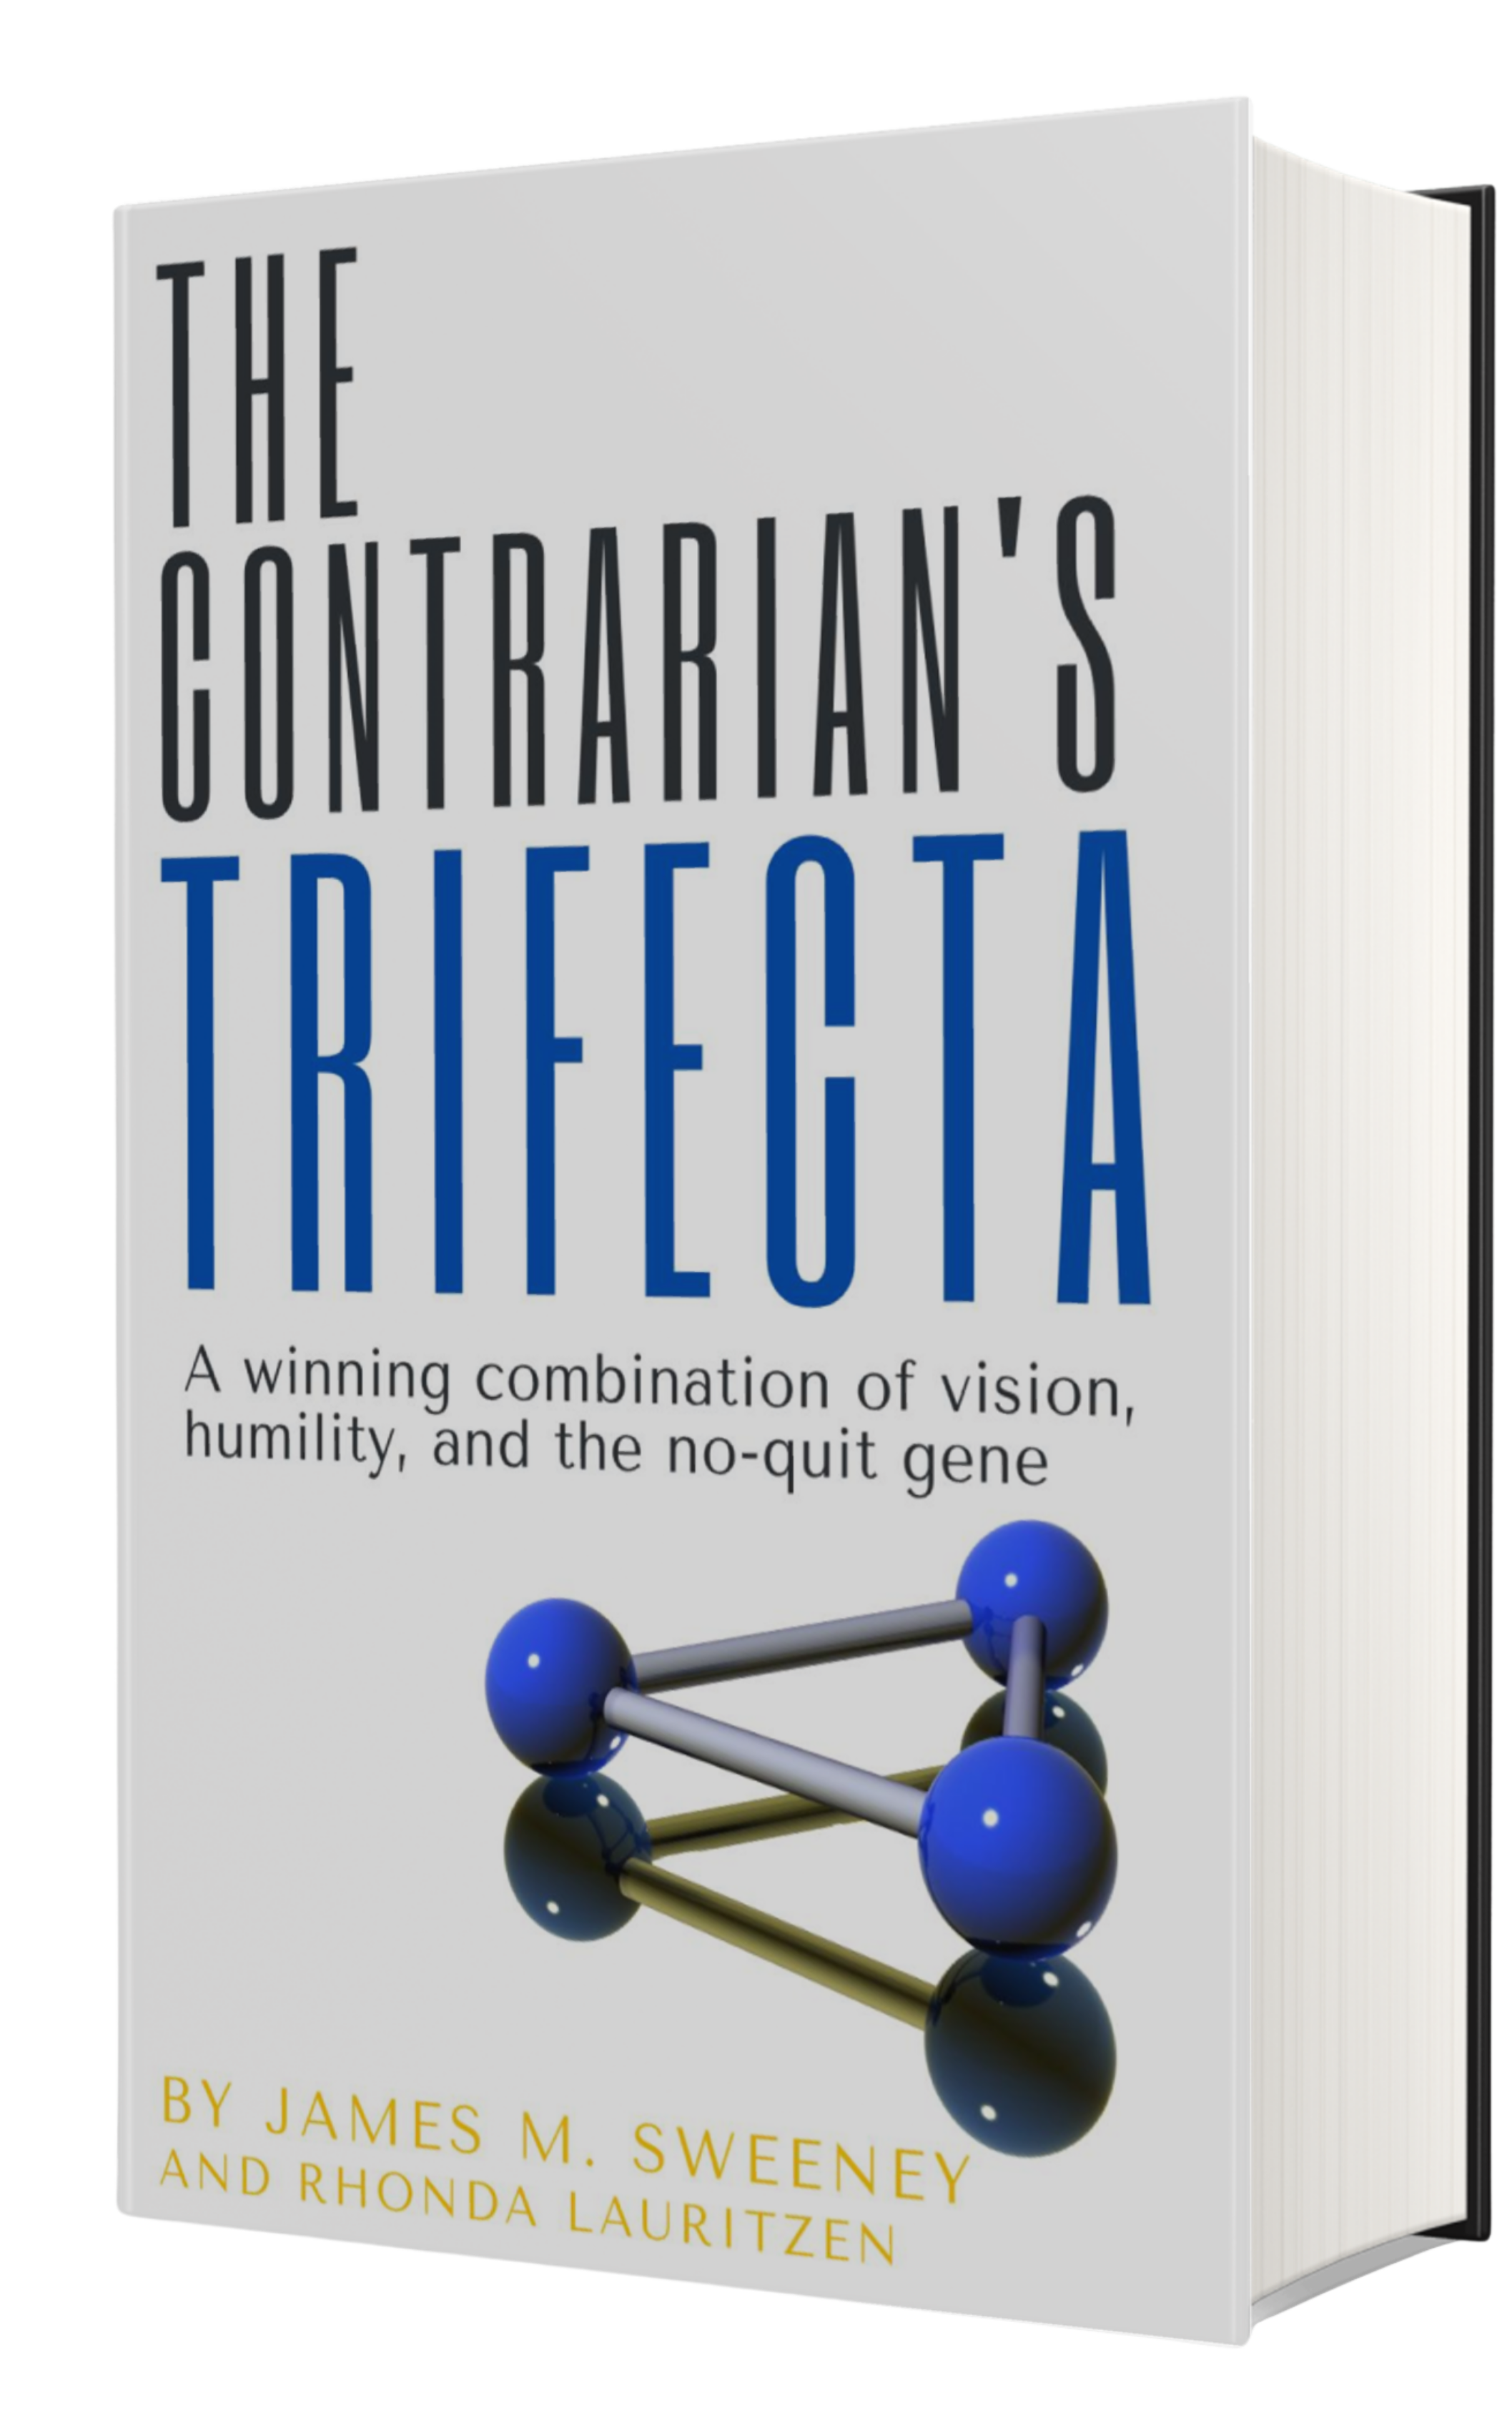 Book cover mockup - The contrarian's Trifecta